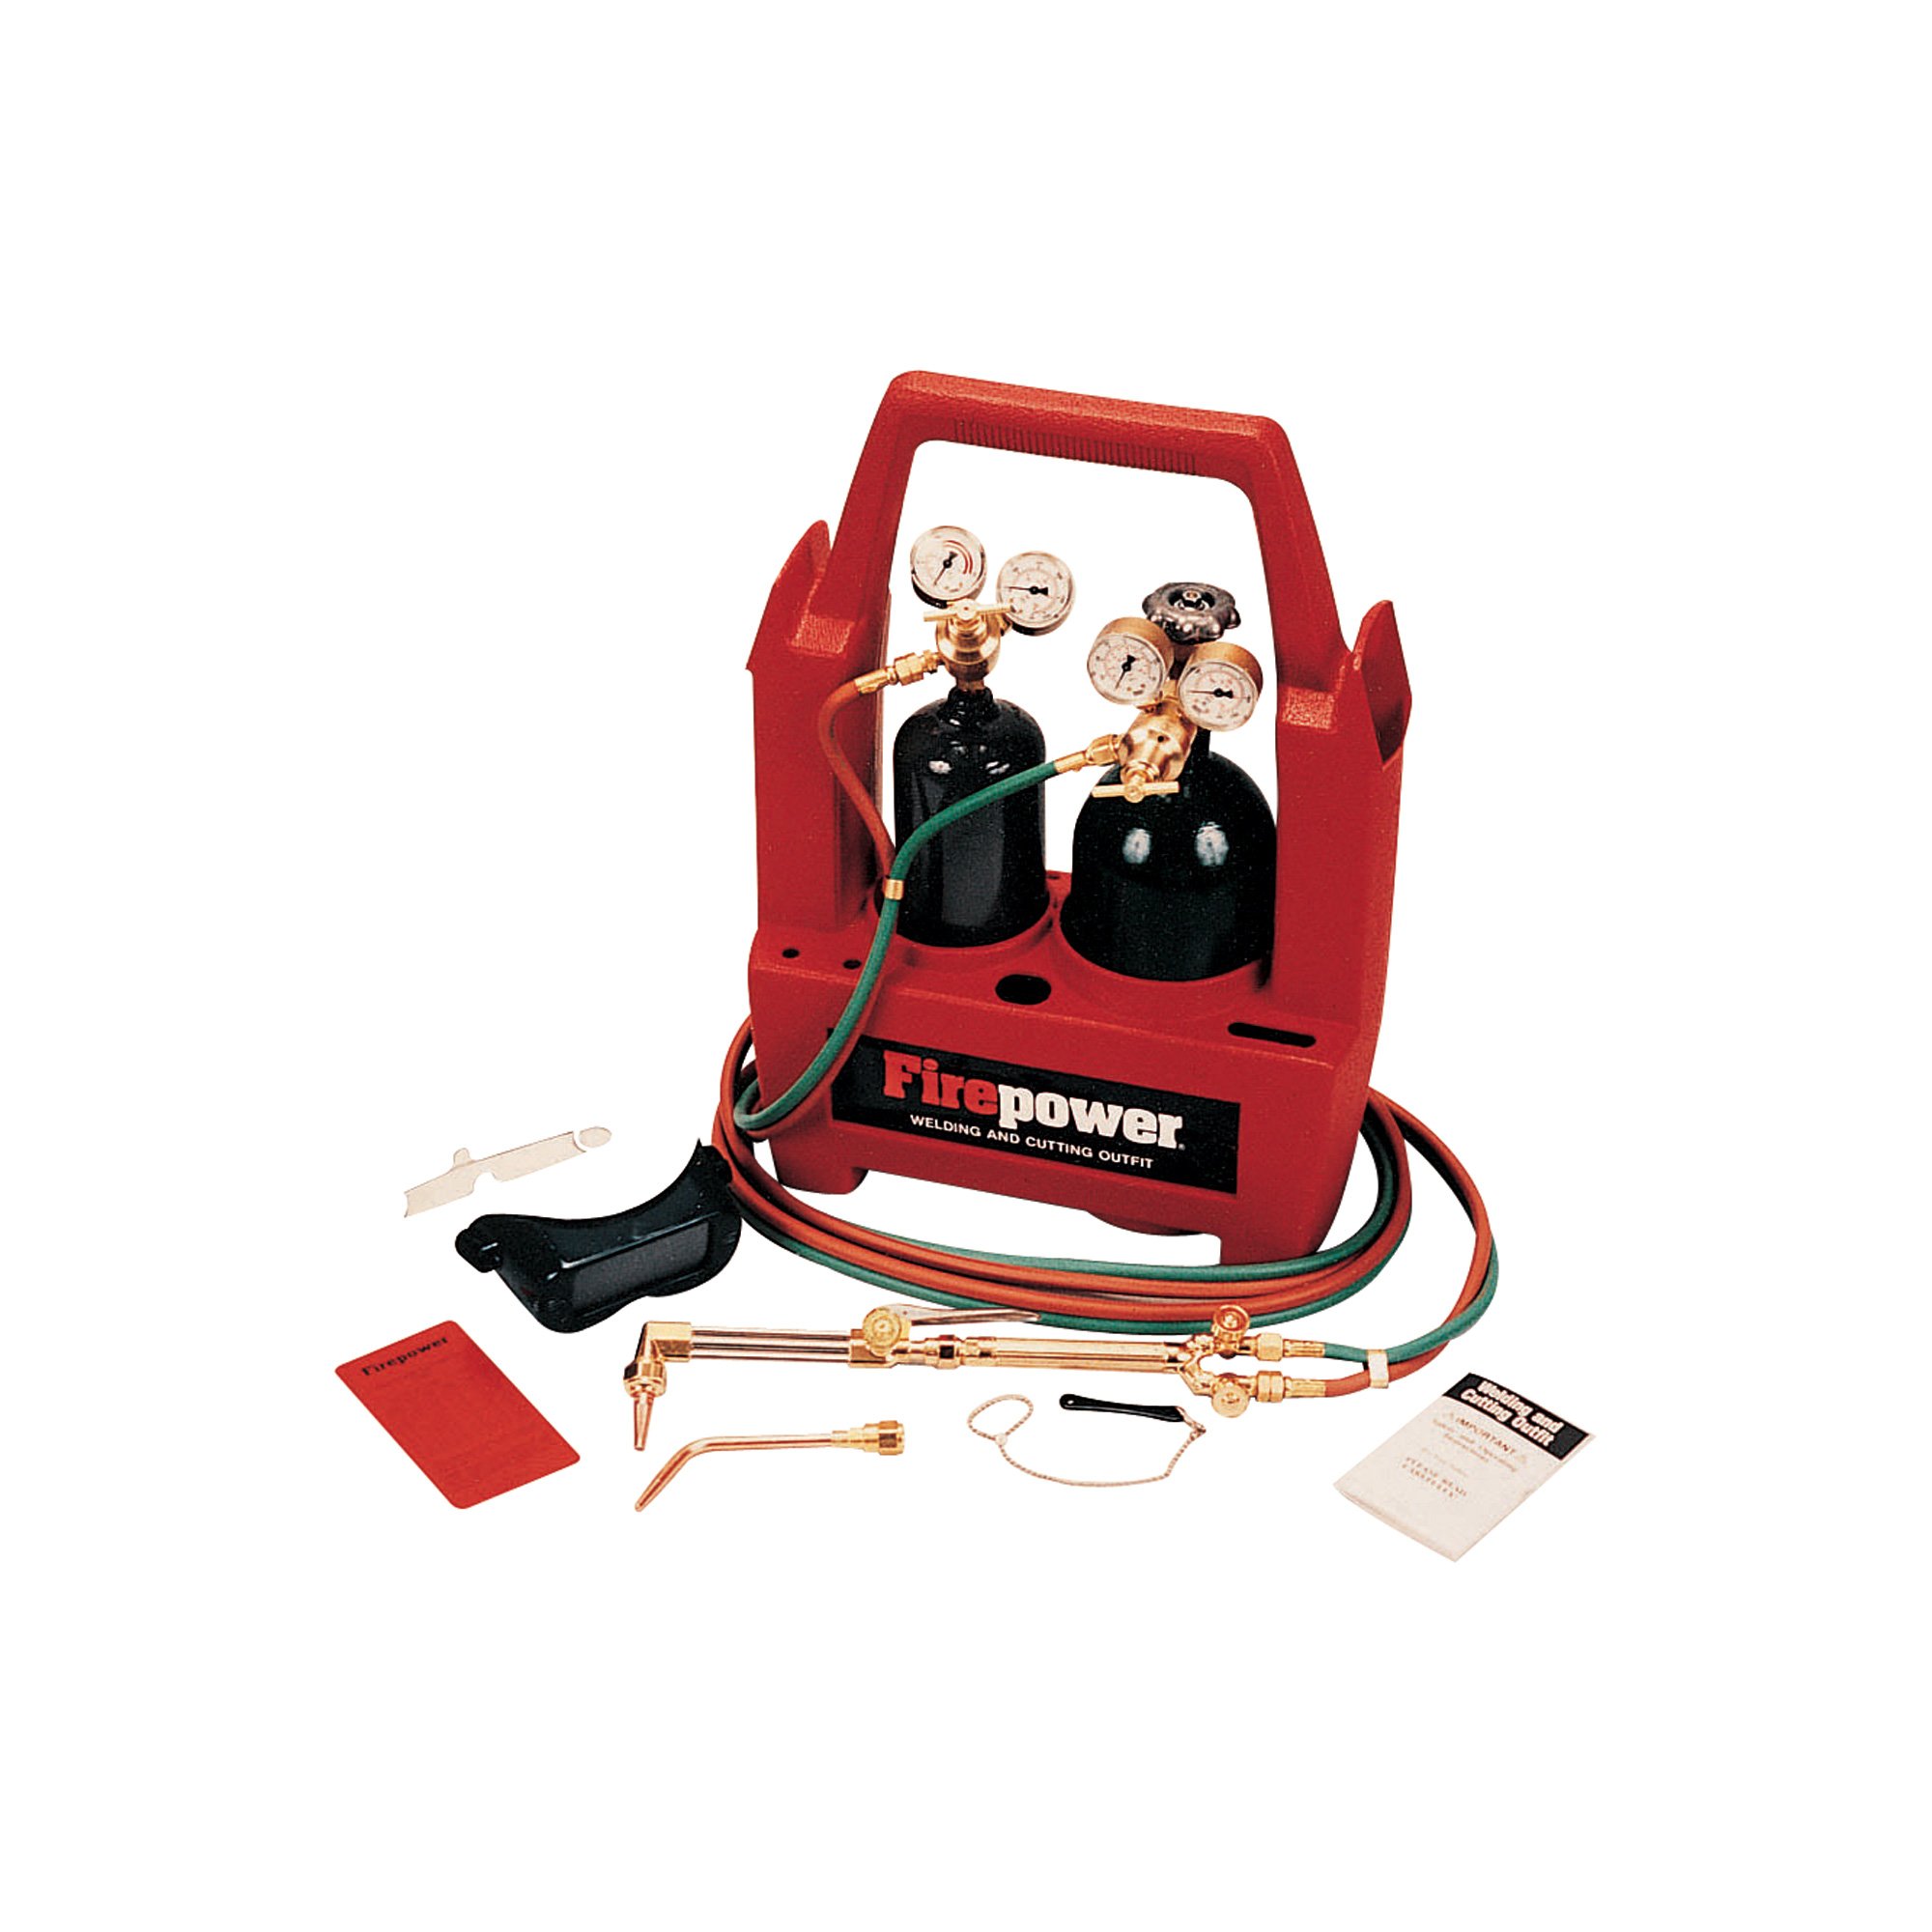 Firepower Portable Torch Kit with Cylinders... Your Complete Welding ...